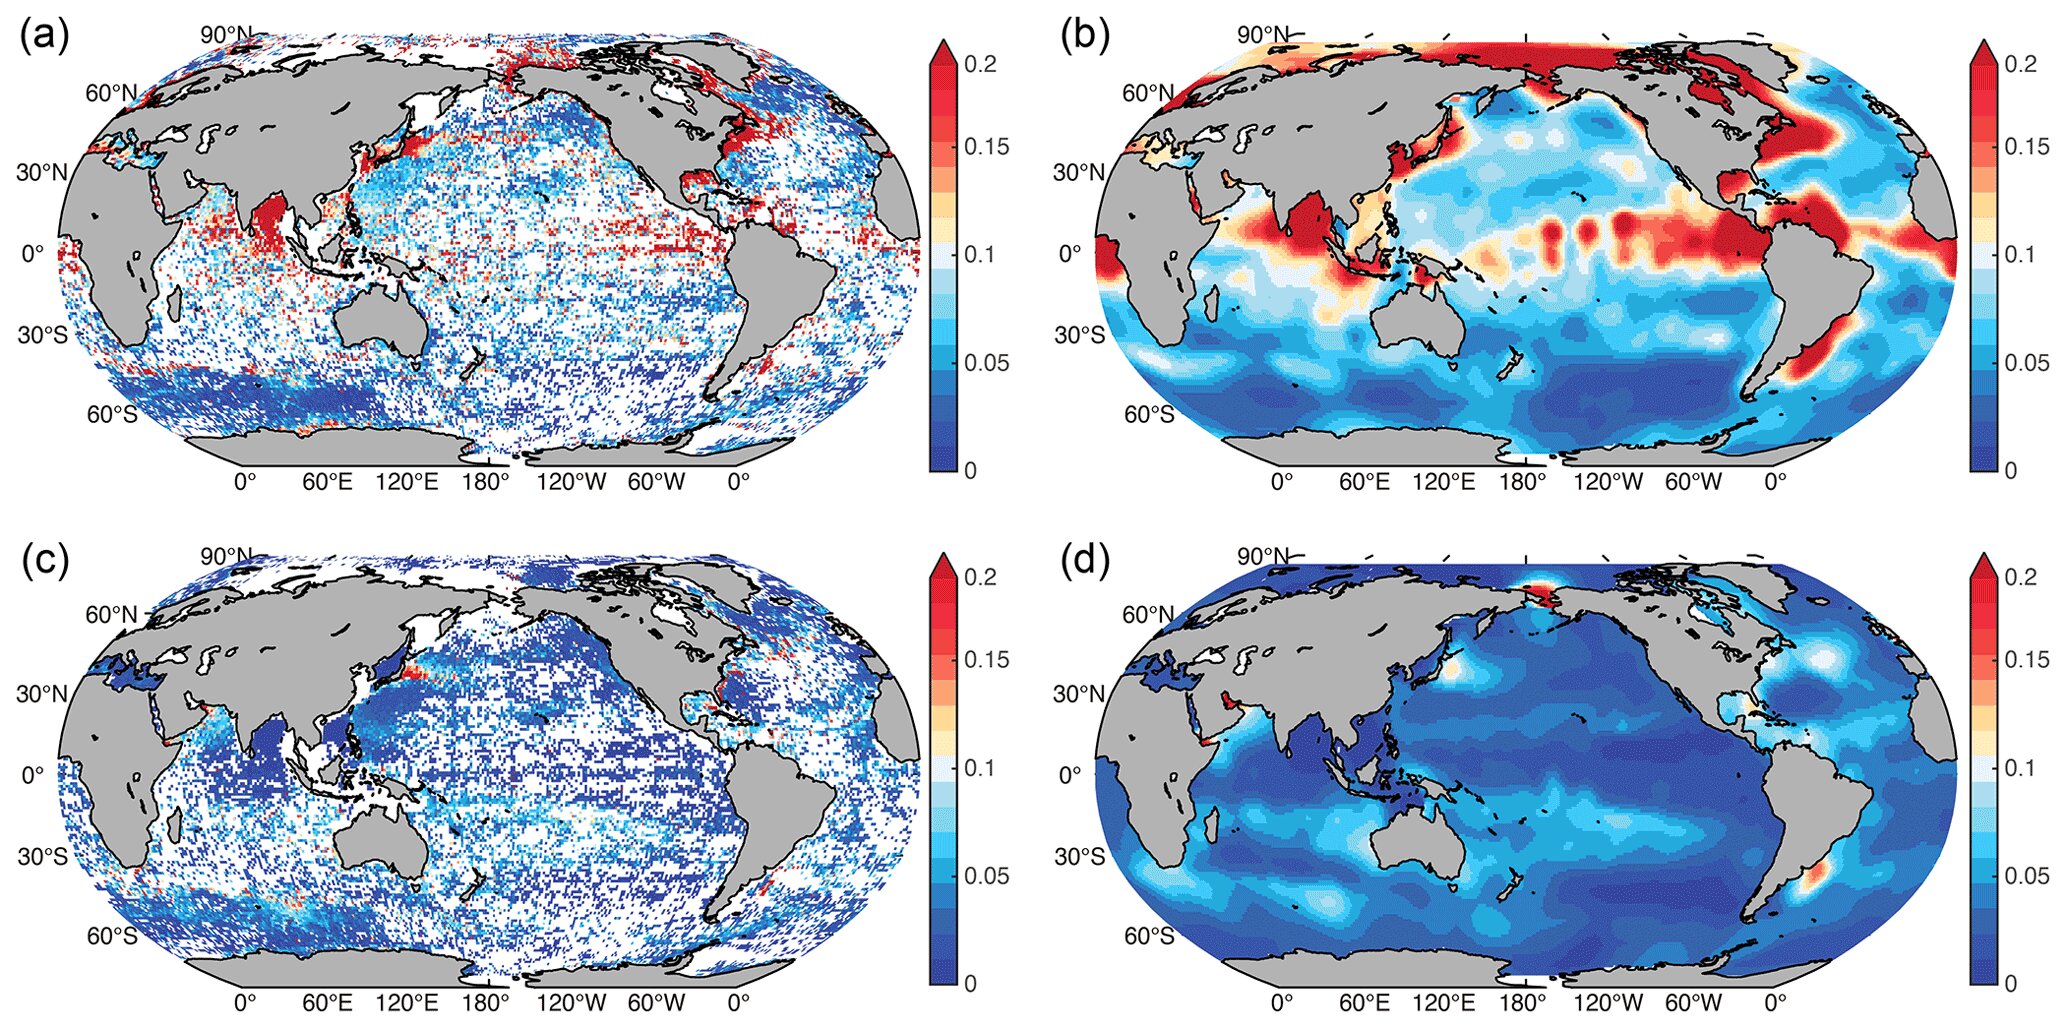 Machine learning approach to reconstructing high-resolution ocean subsurface salinity dataset